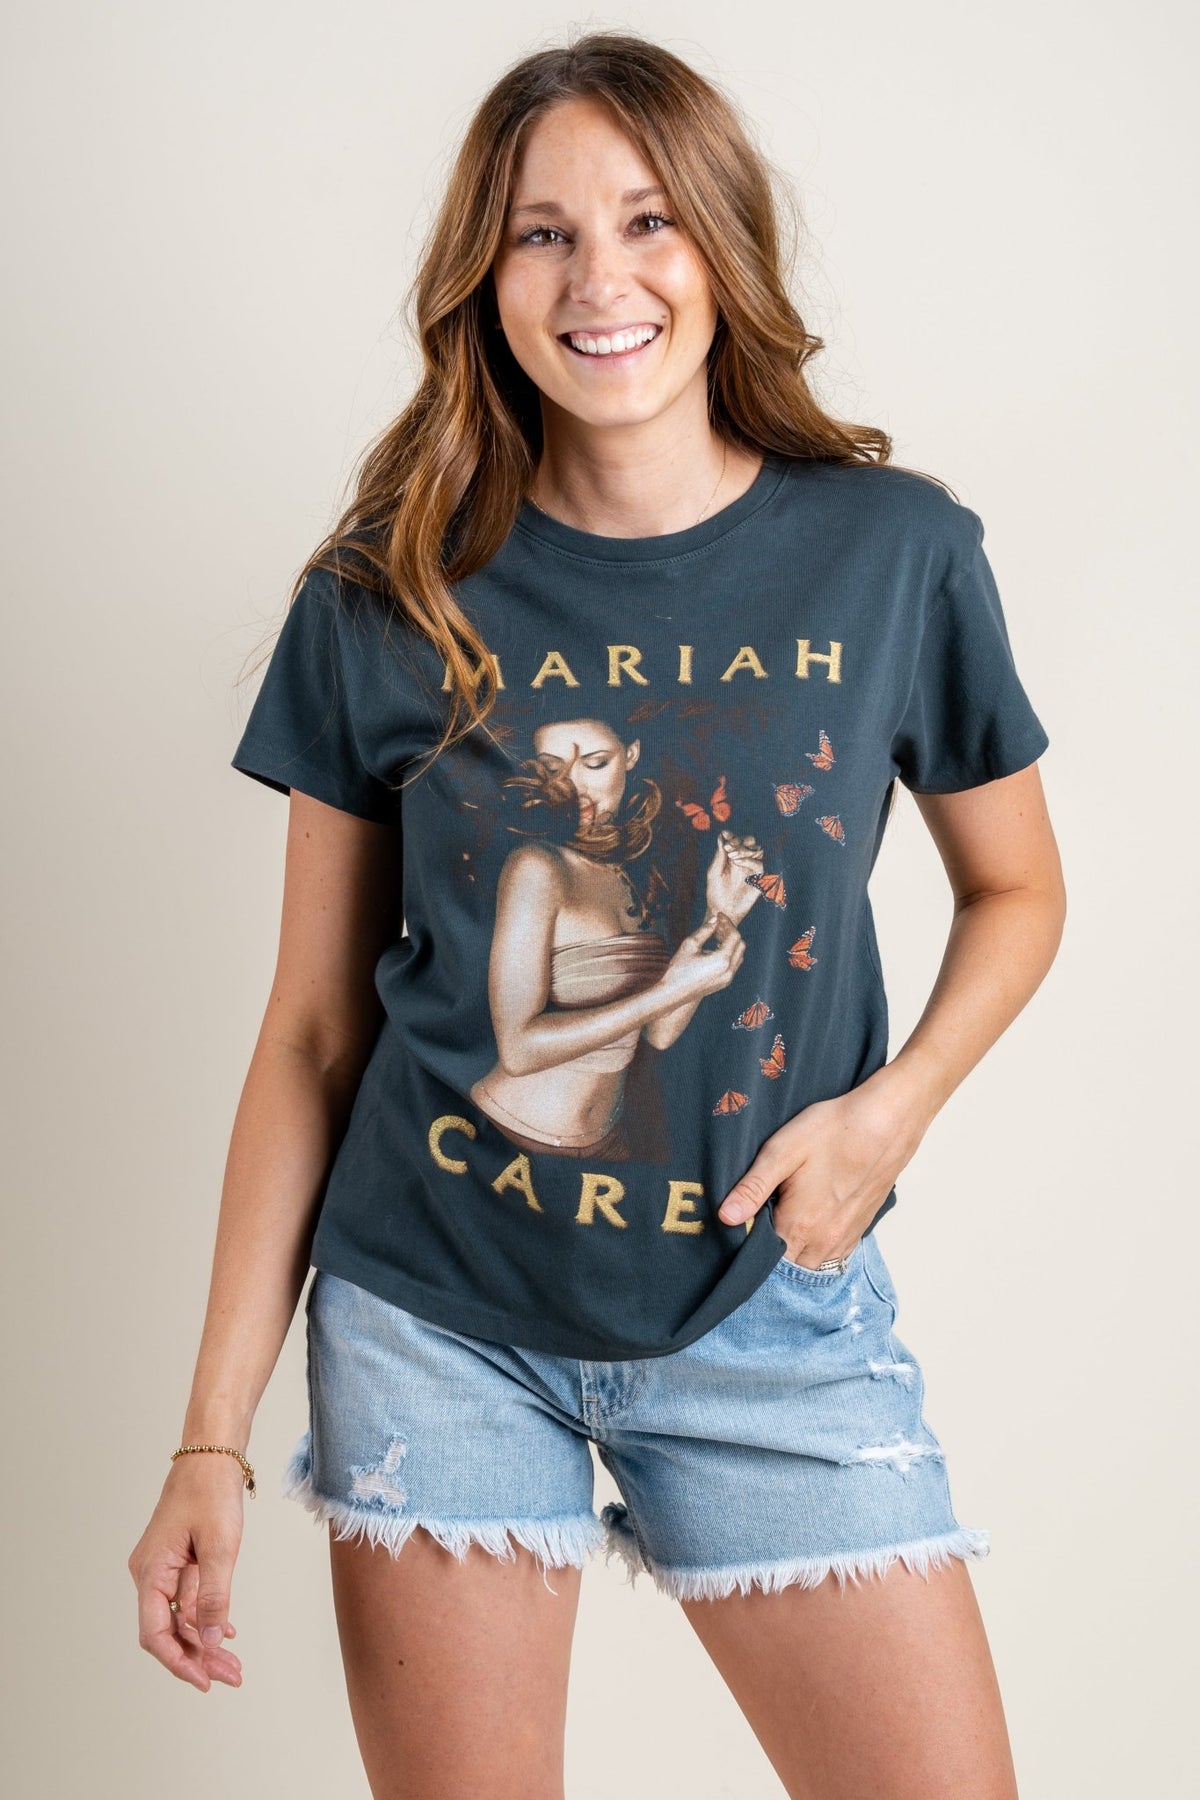 DayDreamer Mariah Carey butterfly t-shirt vintage black - Trendy Band T-Shirts and Sweatshirts at Lush Fashion Lounge Boutique in Oklahoma City